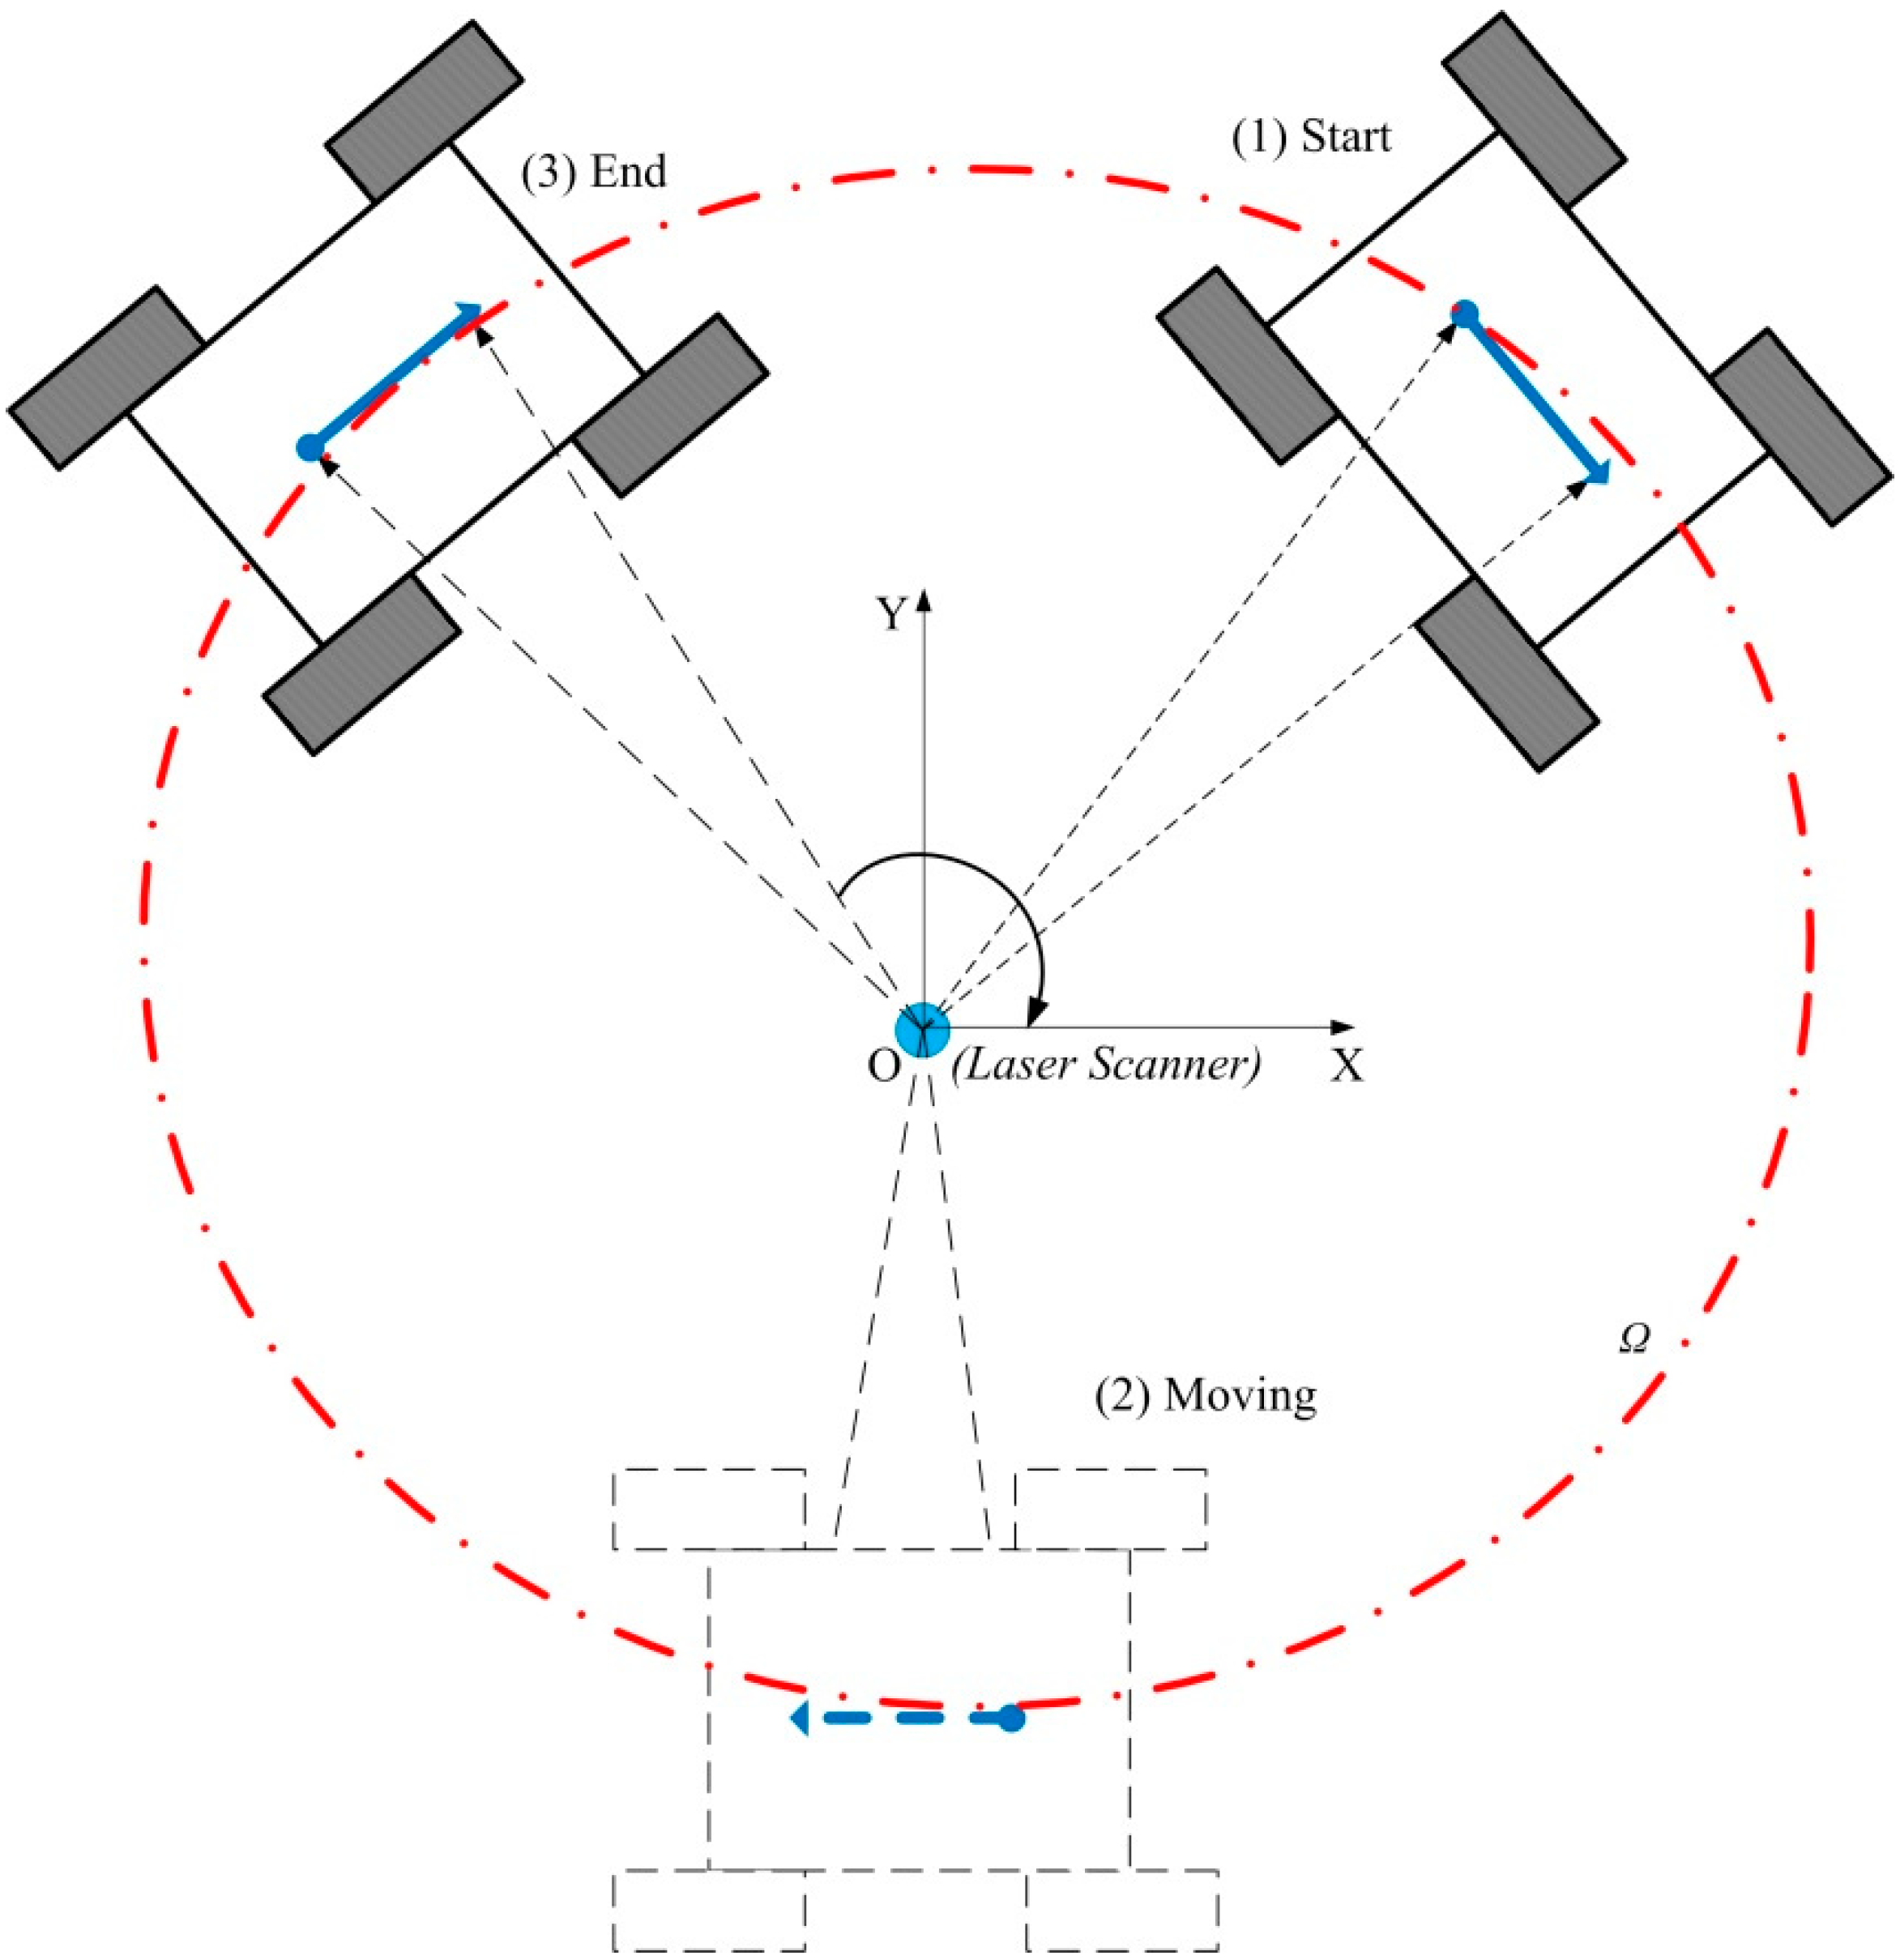 Sensors | Free Full-Text | Analysis and Experimental Kinematics of a Skid- Steering Wheeled Robot Based on a Laser Scanner Sensor | HTML